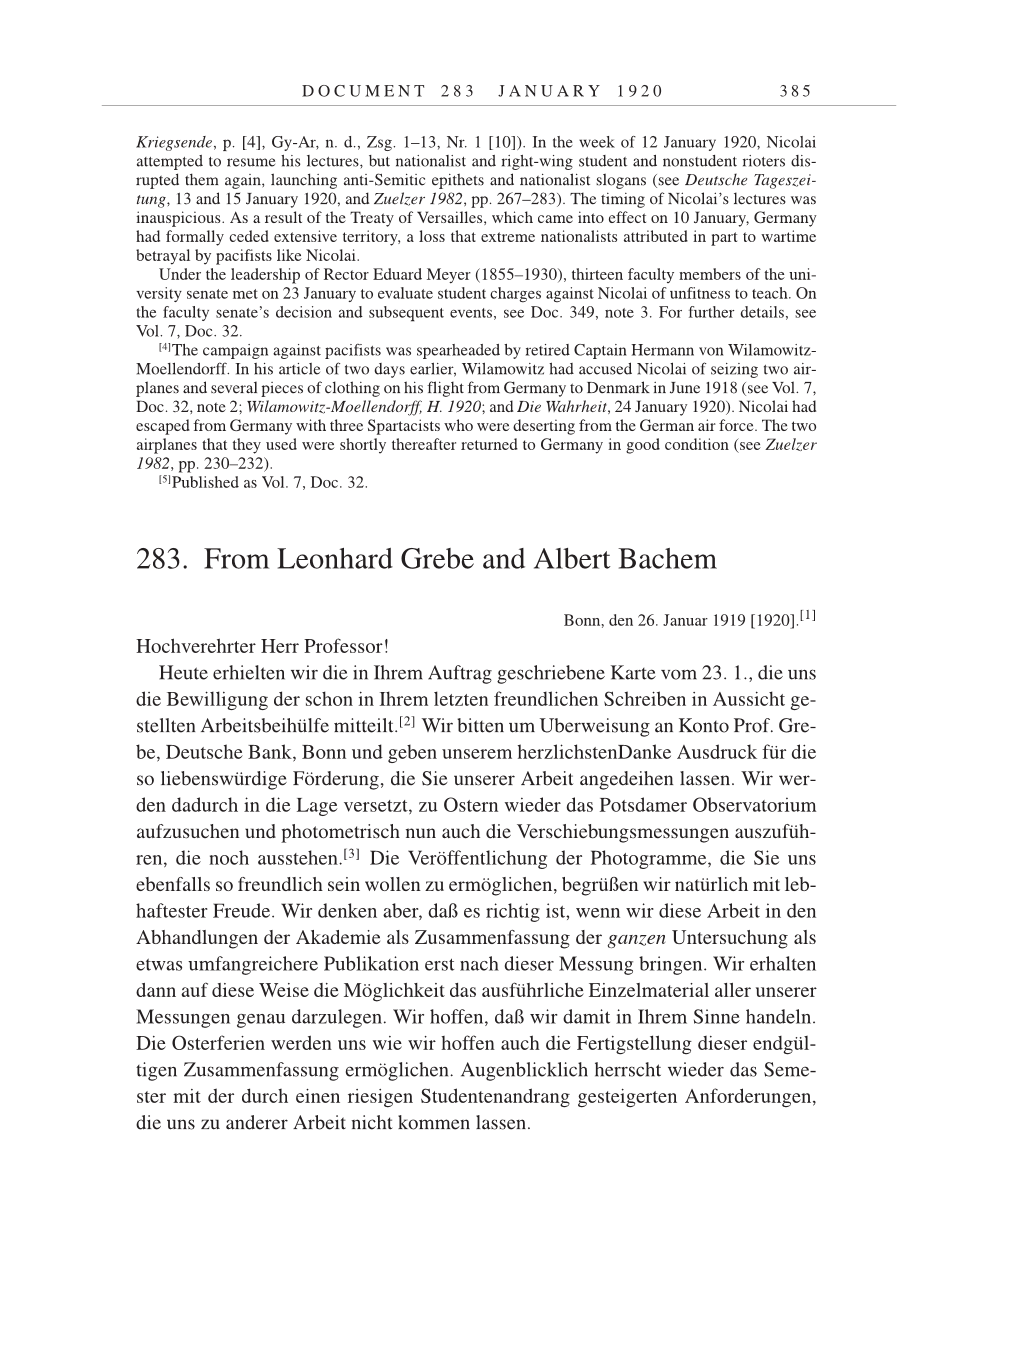 Volume 9: The Berlin Years: Correspondence January 1919-April 1920 page 385